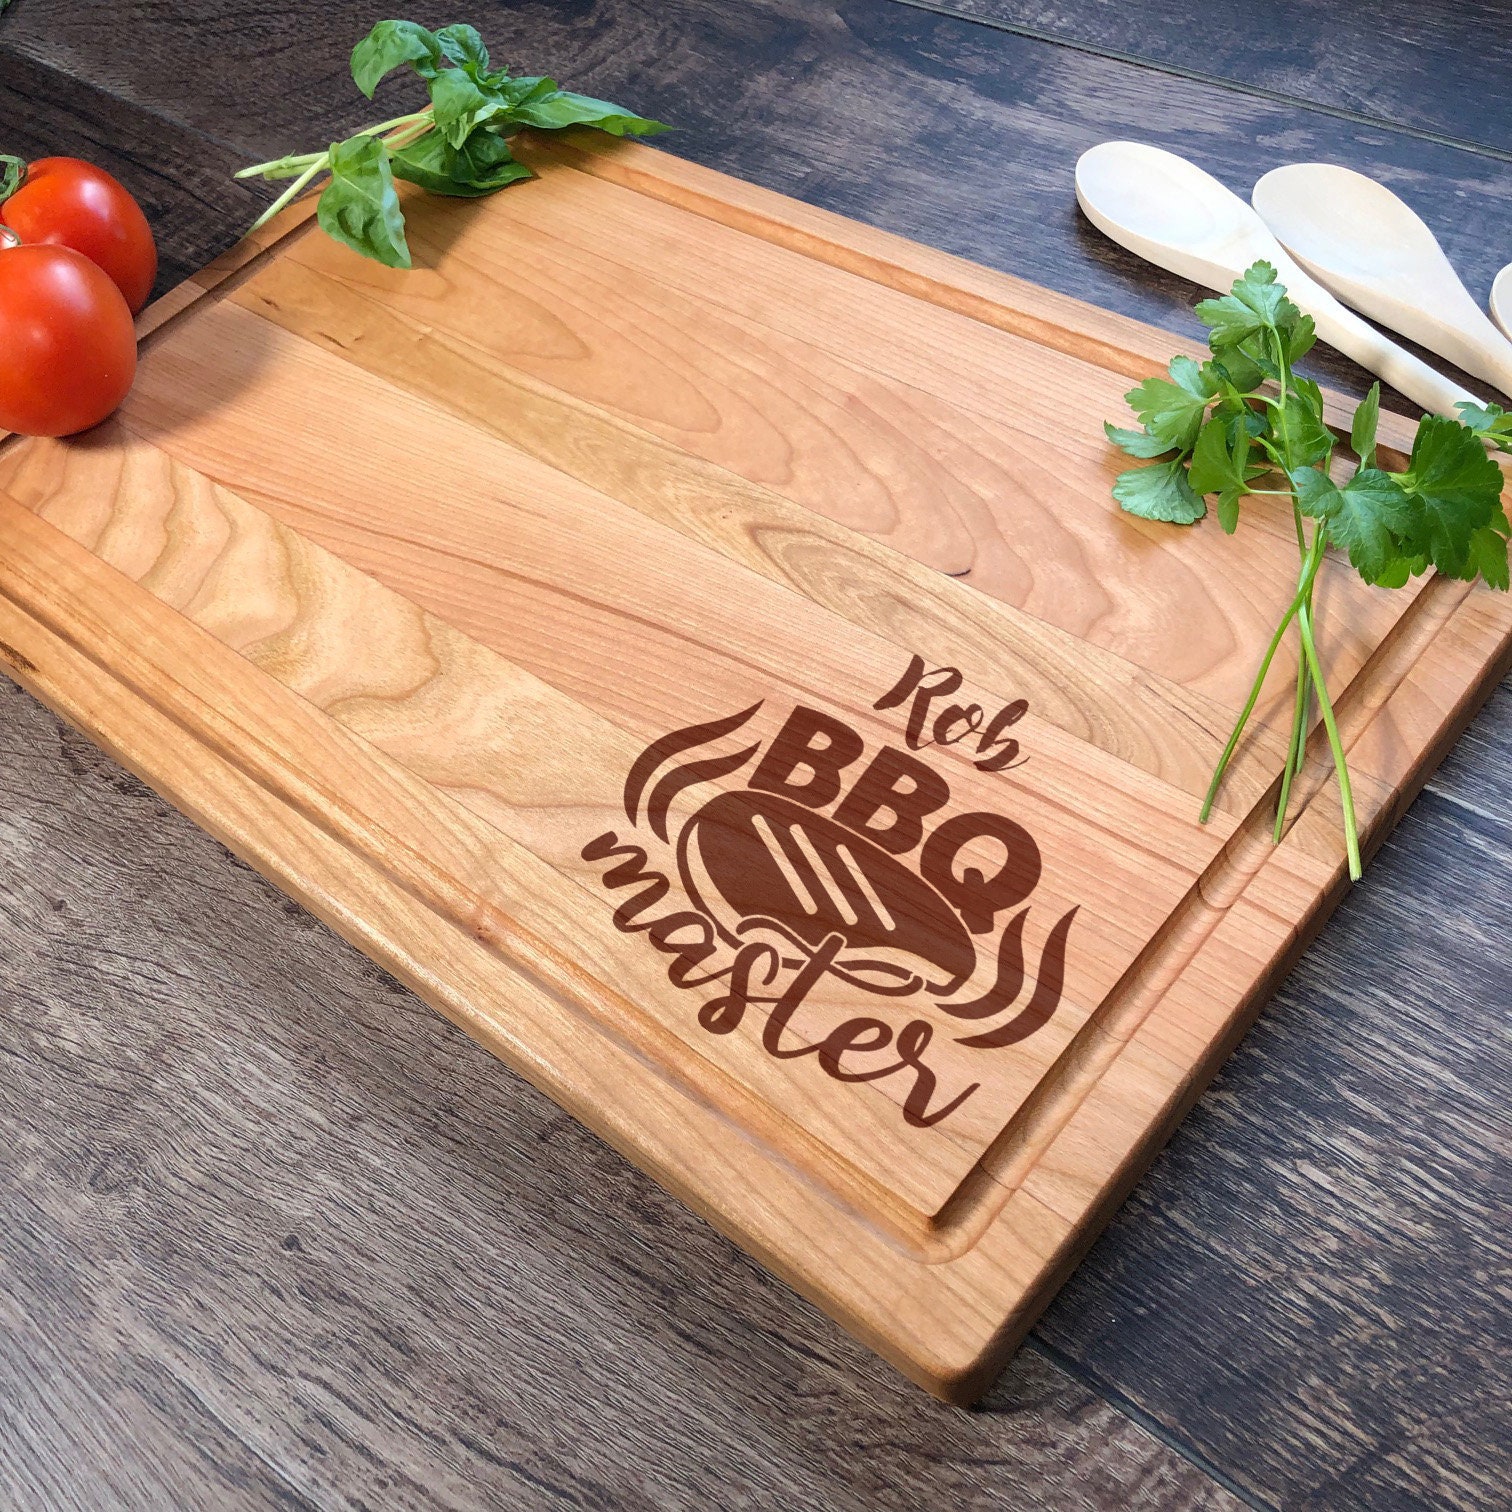 14 x 20 x 3/4 Cherry Wood Cutting Board with Juice Groove and Reservoir.